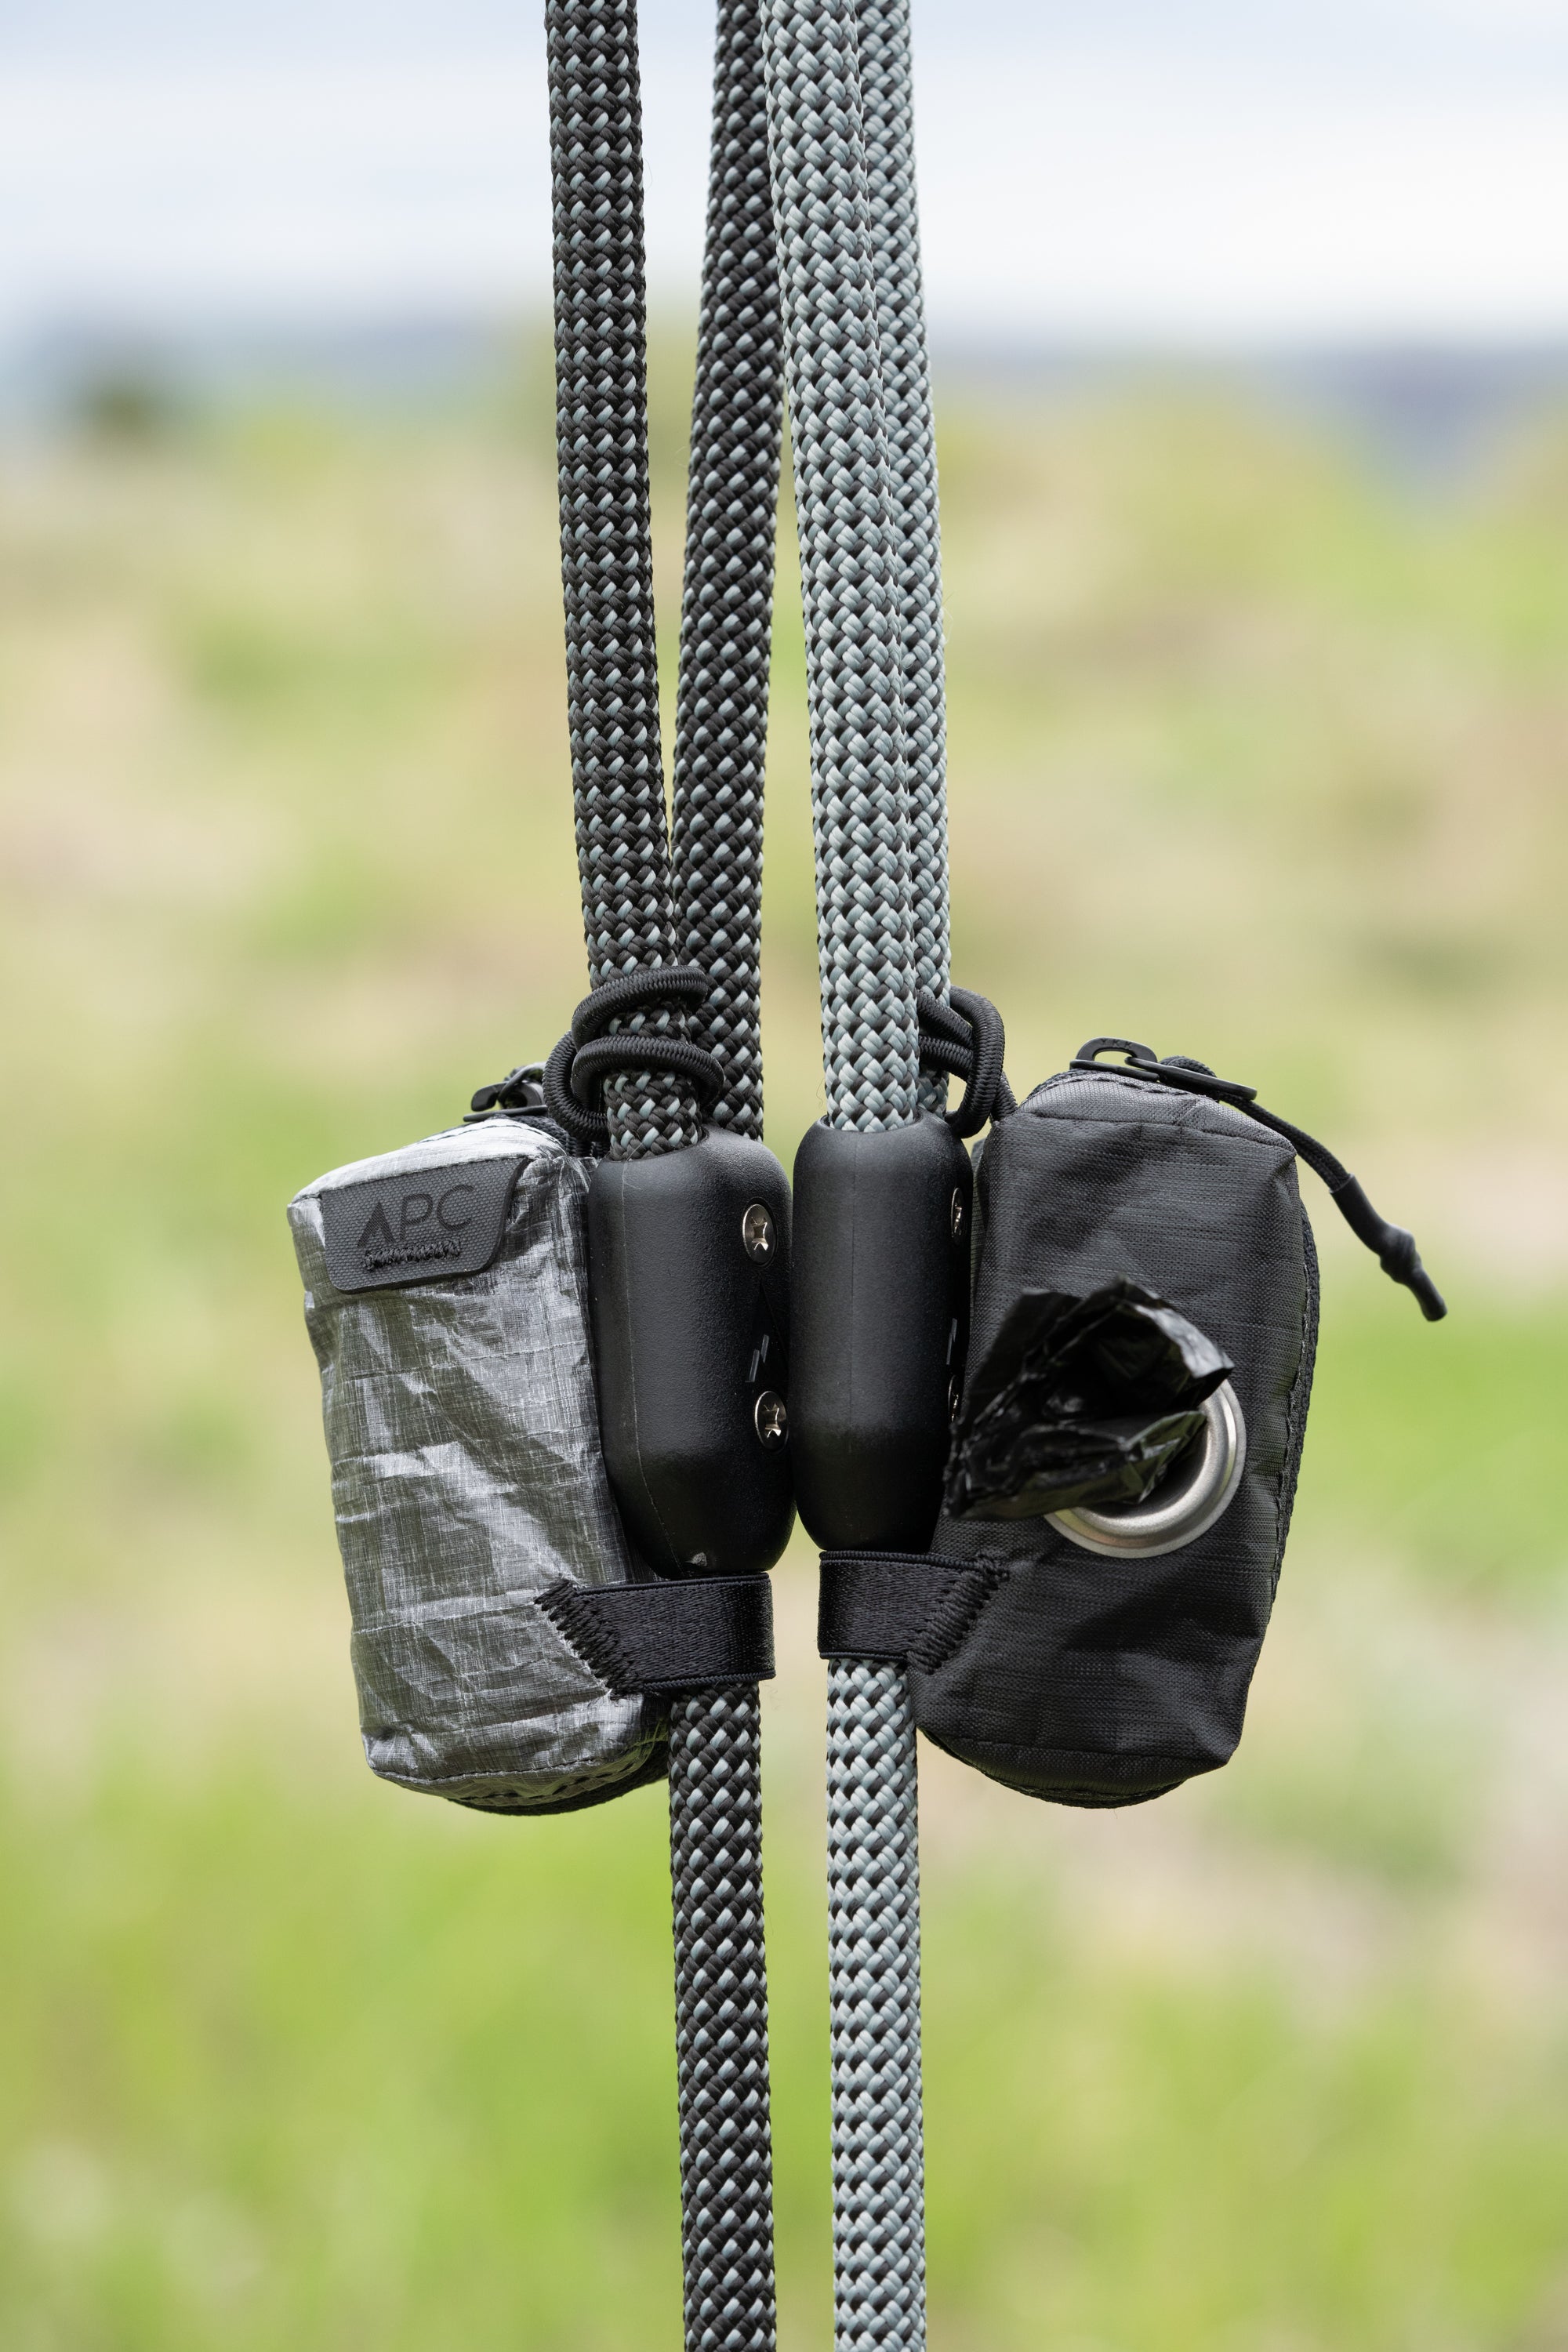 atlas pet company lifetime pouch made with dyneema in charcoal and black on lifetime leash to easily carry poop bags 